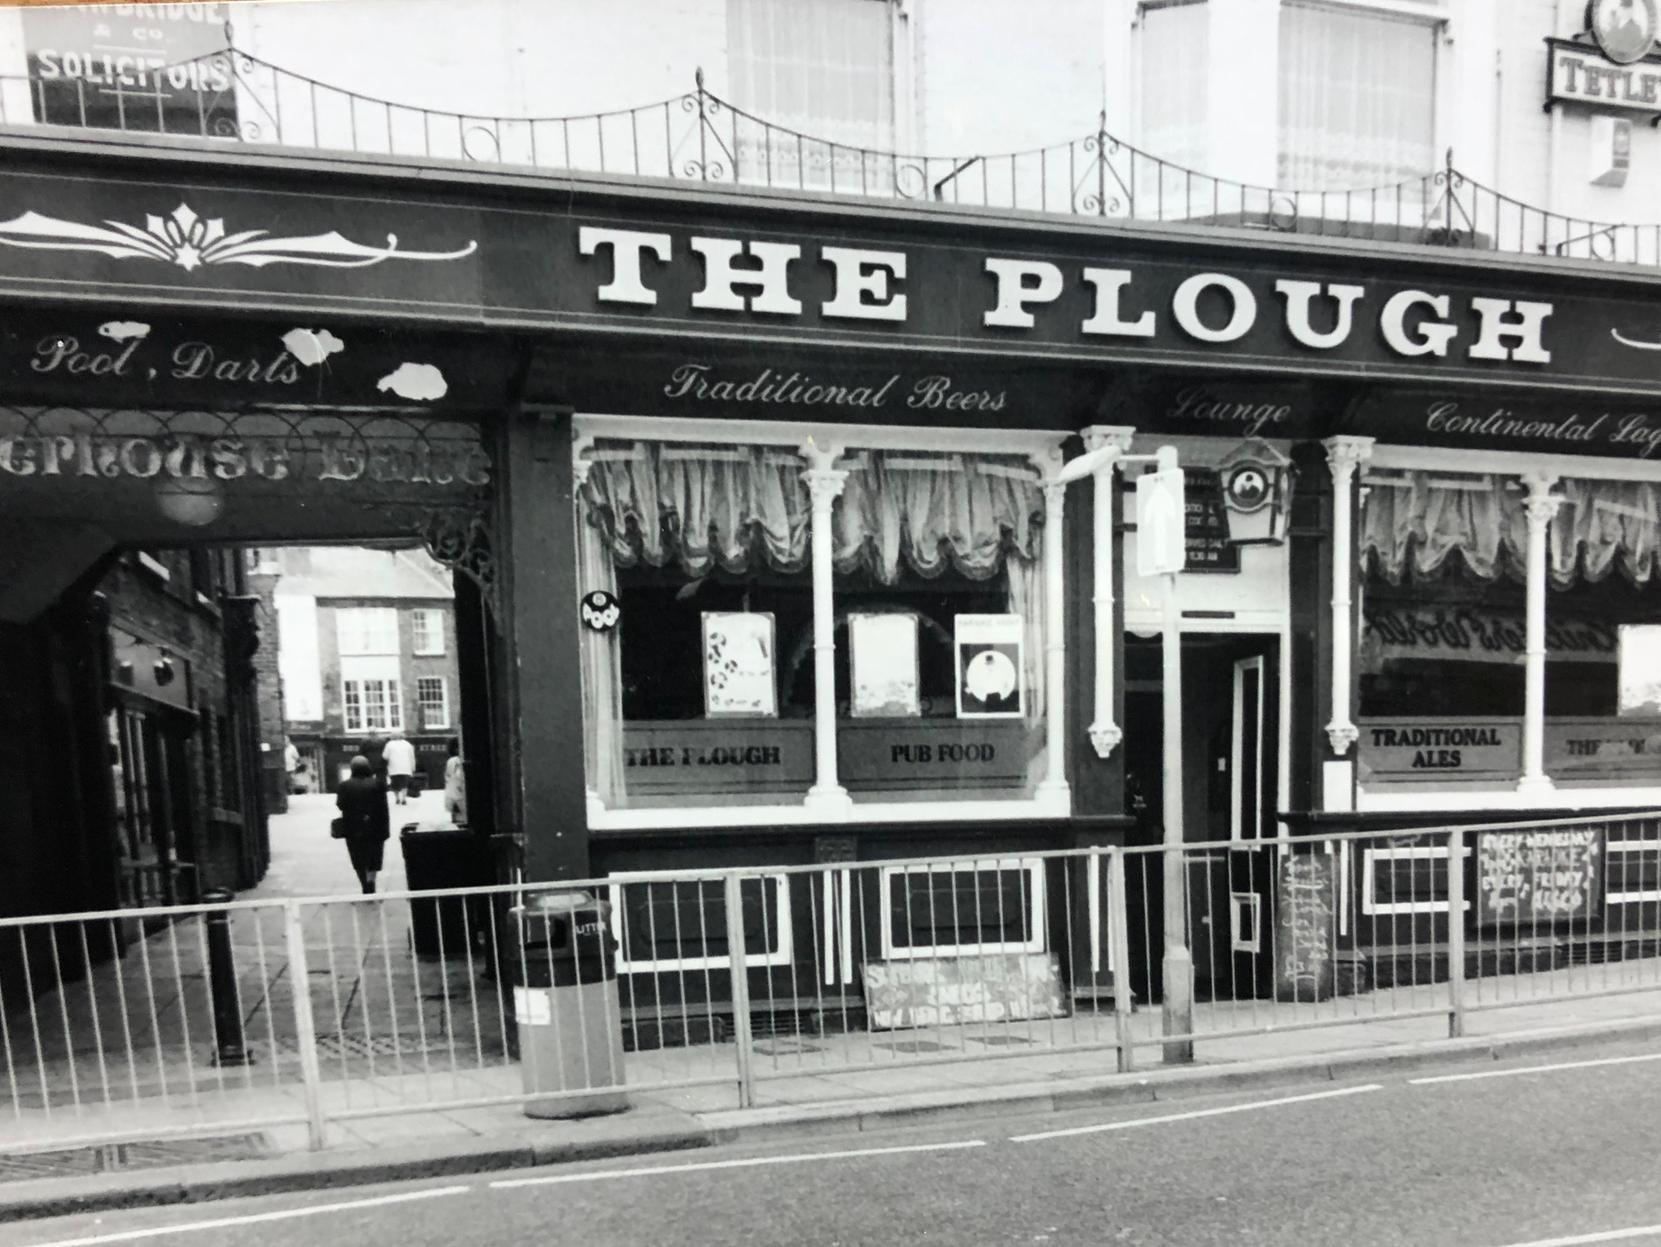 The Plough, then Privilege, is now the site of Waterhouse on St Thomas Street.